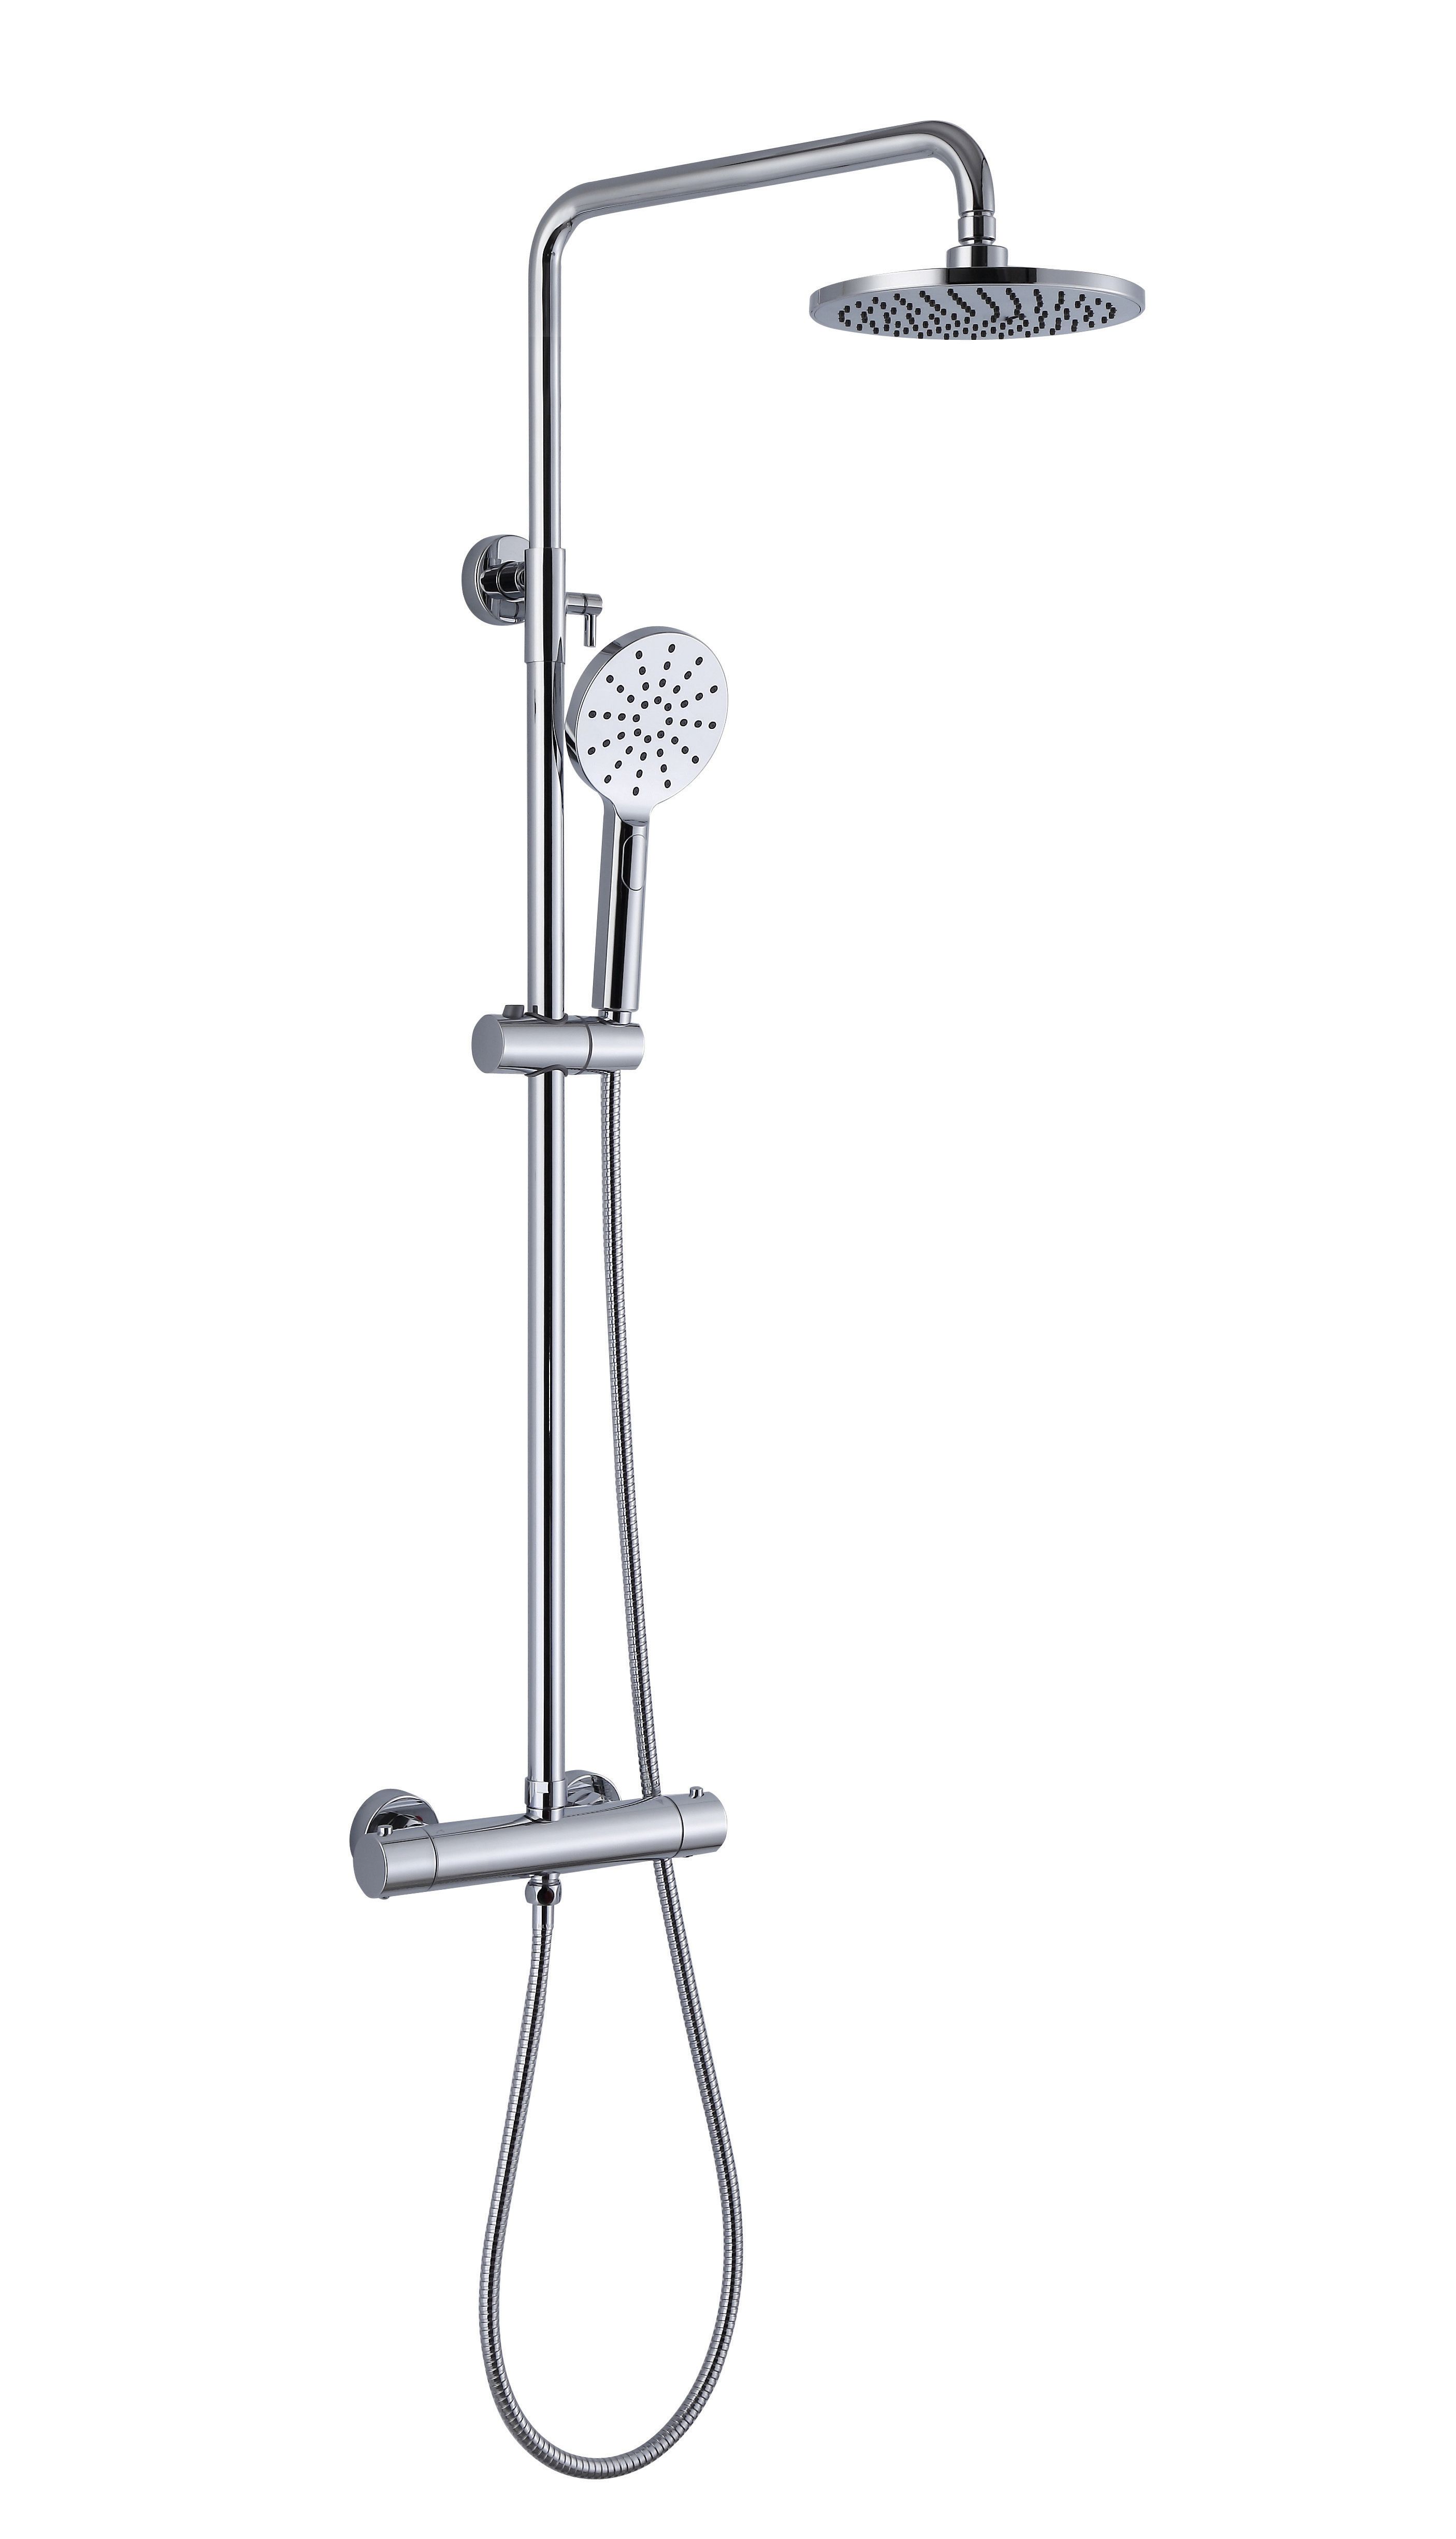 Image of Wickes Allure Thermostatic Shower Mixer & Diverter - Chrome